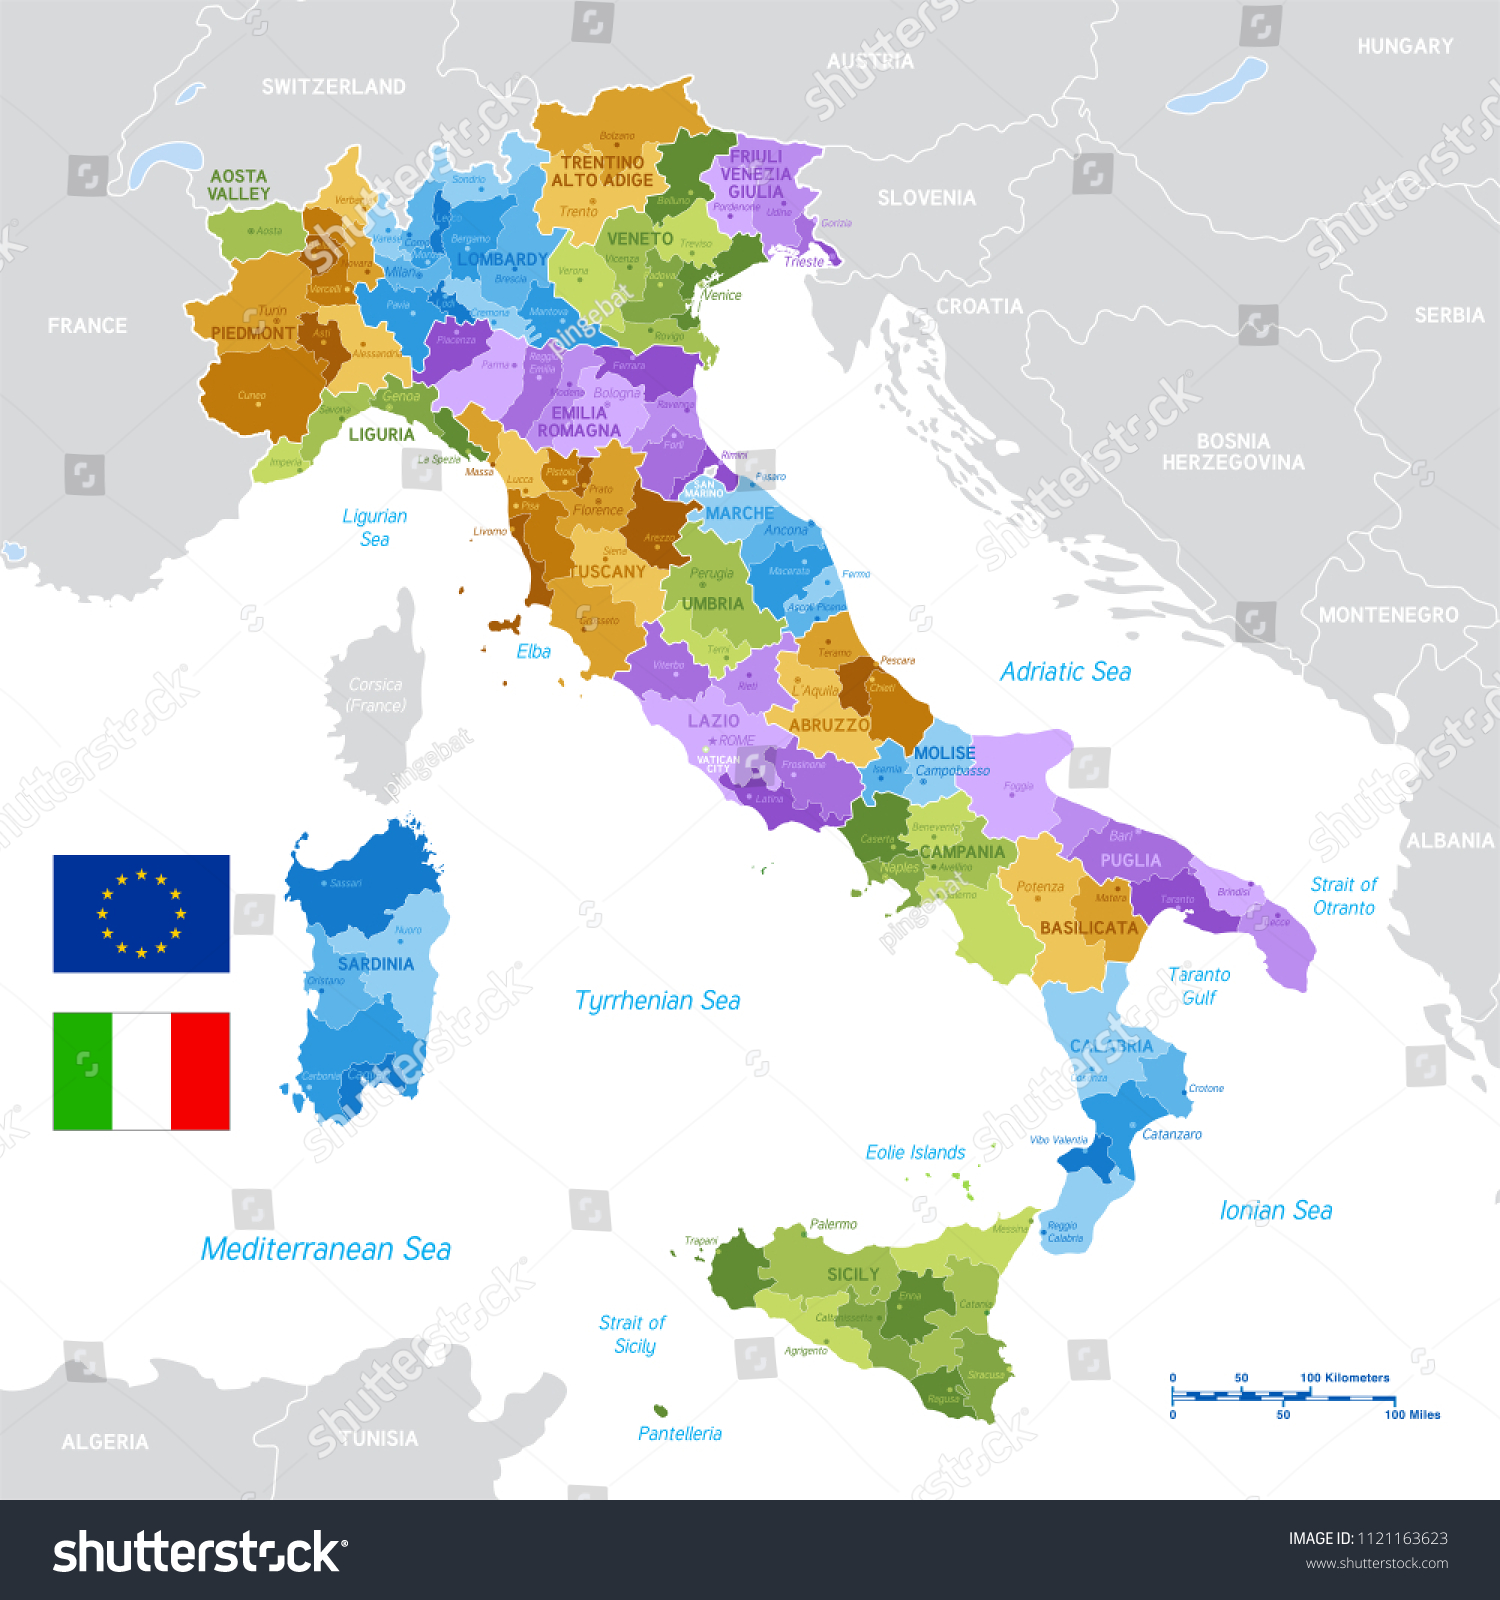 provinces of italy map Vector Political Map Italy Full Region Stock Vector Royalty Free